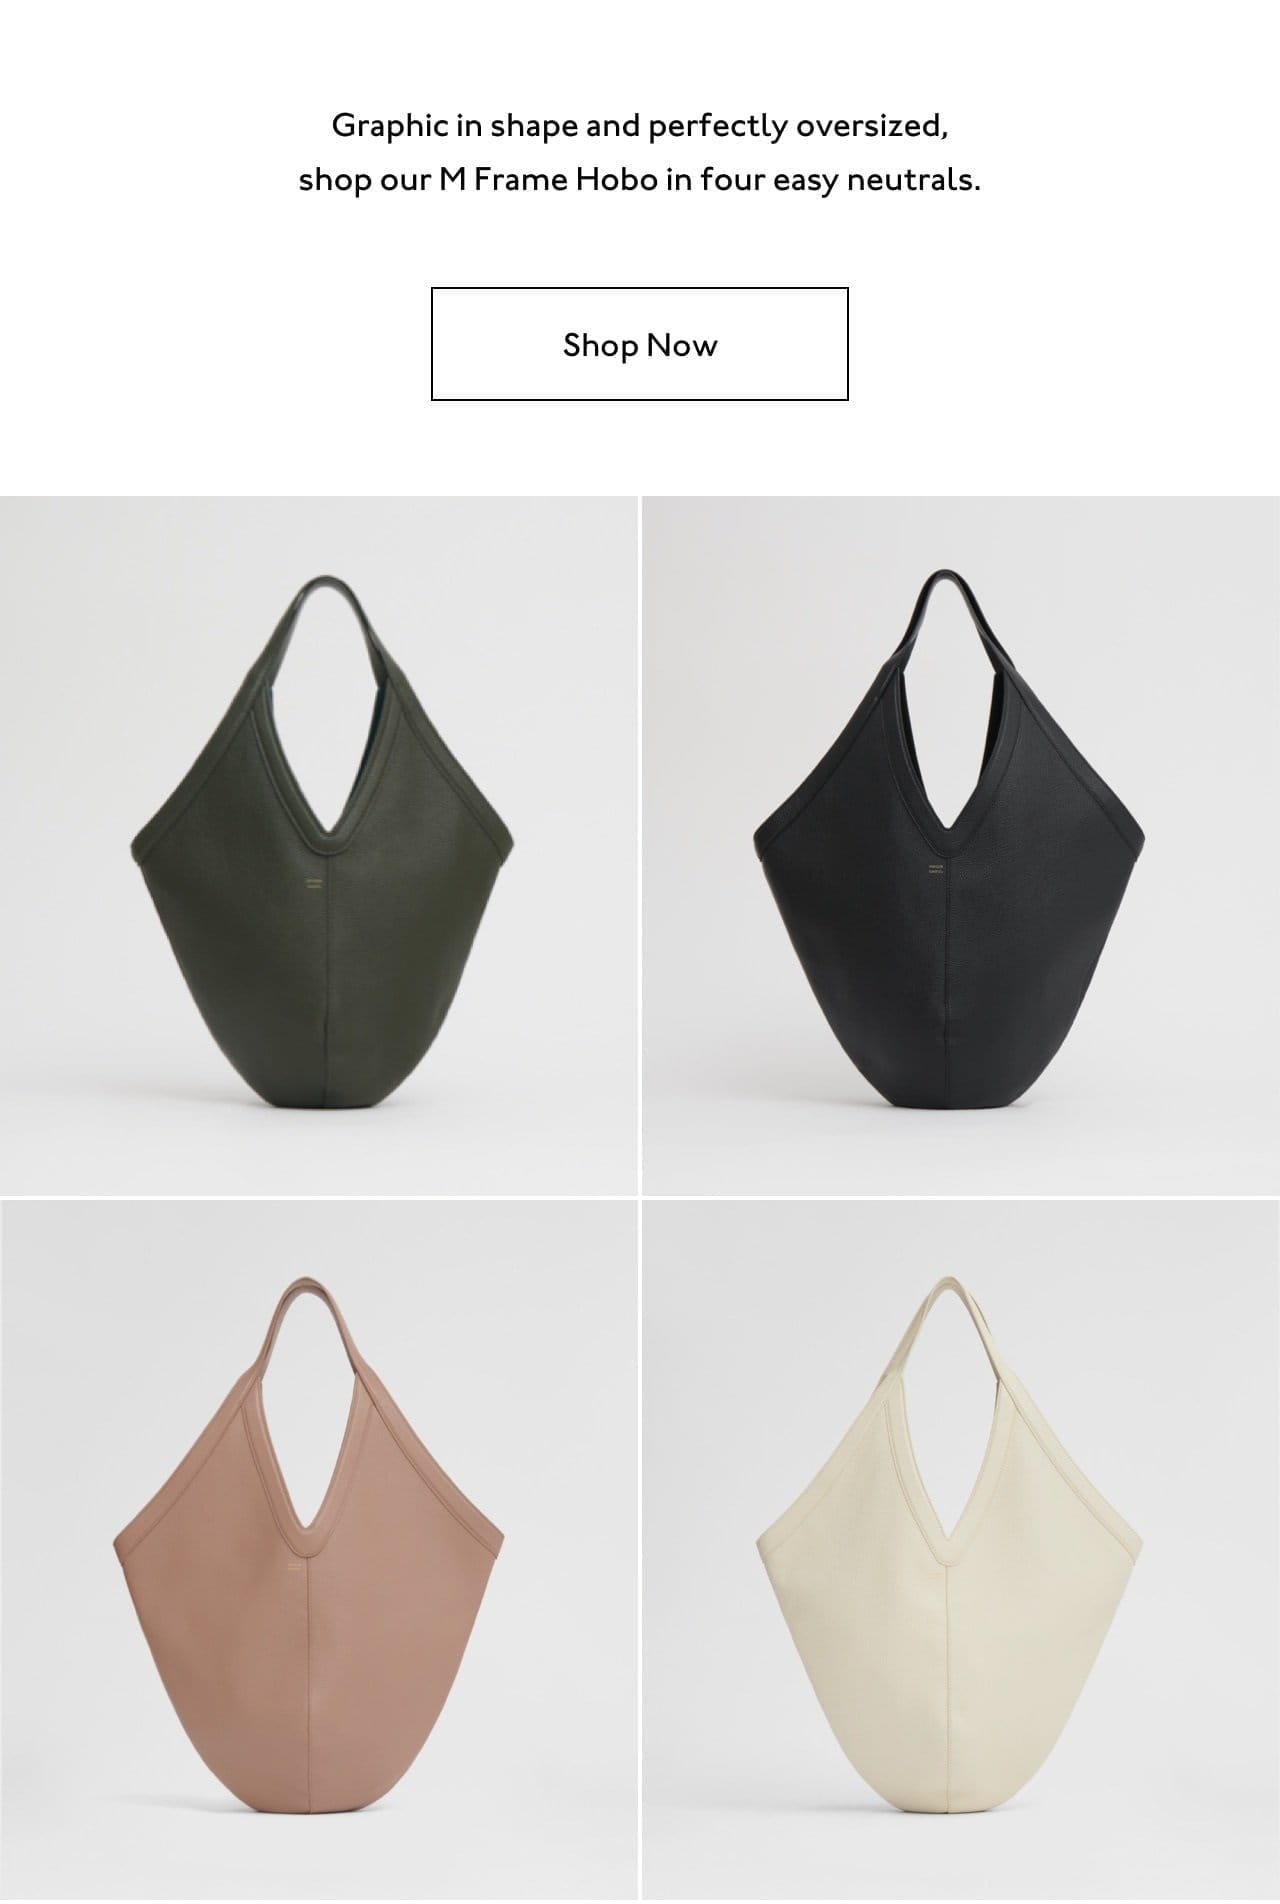 Graphic in shape and perfectly oversized, shop our M Frame Hobo in four easy neutrals: Seaweed, Black, Biscotto, Avorio.